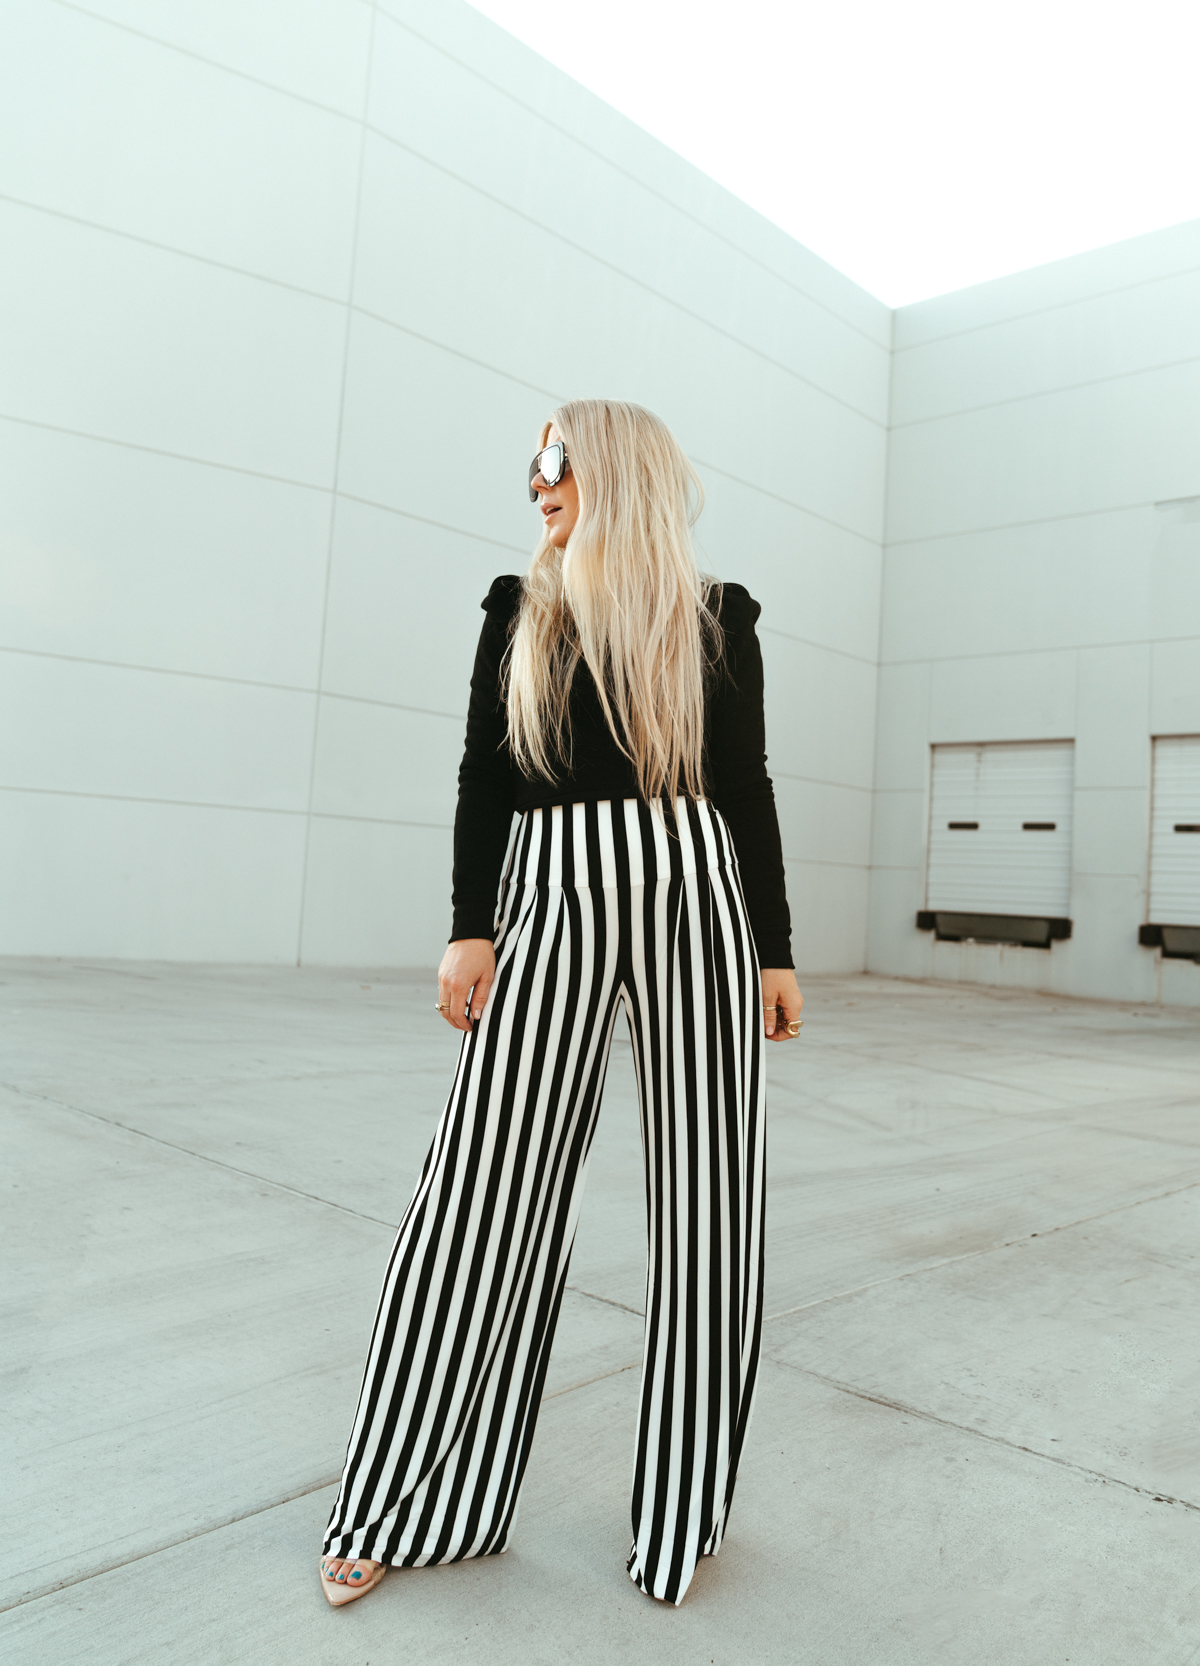 Patterned Pants For Fall